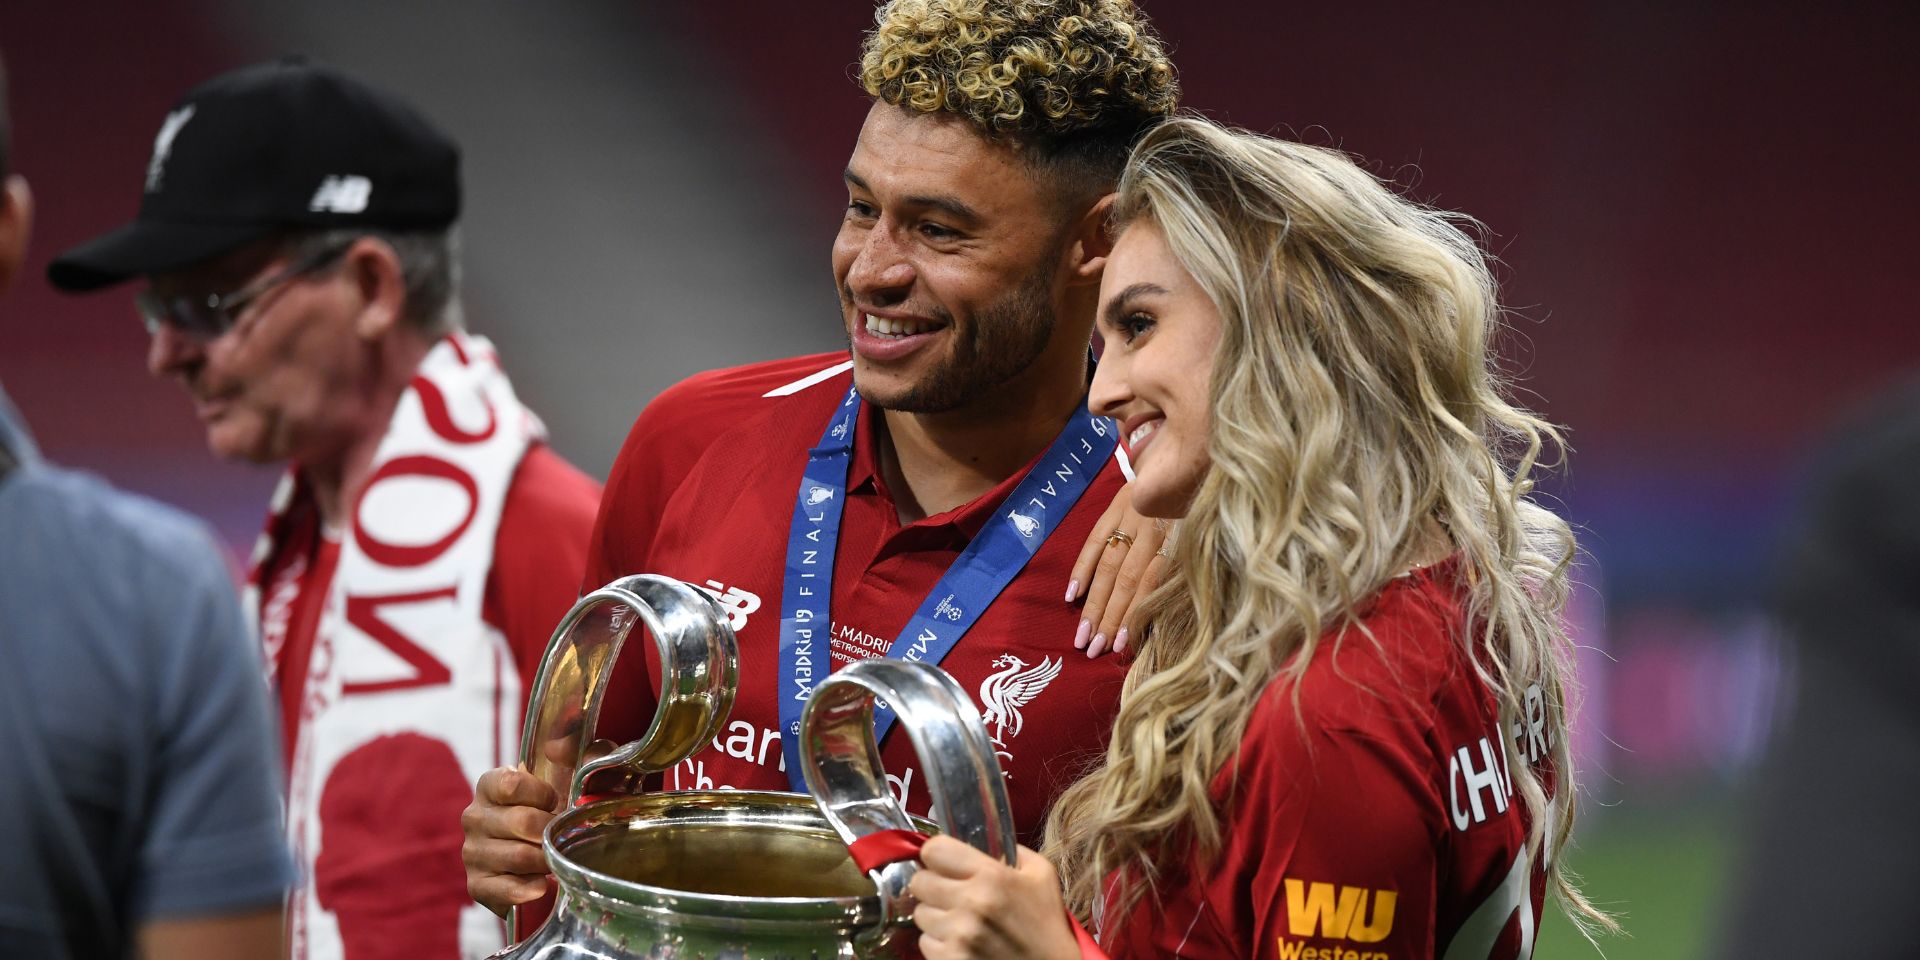 Alex Oxlade-Chamberlain and Perrie Edwards ‘targeted with a terrifying burglary’ at their home in Wilmslow, Cheshire – report